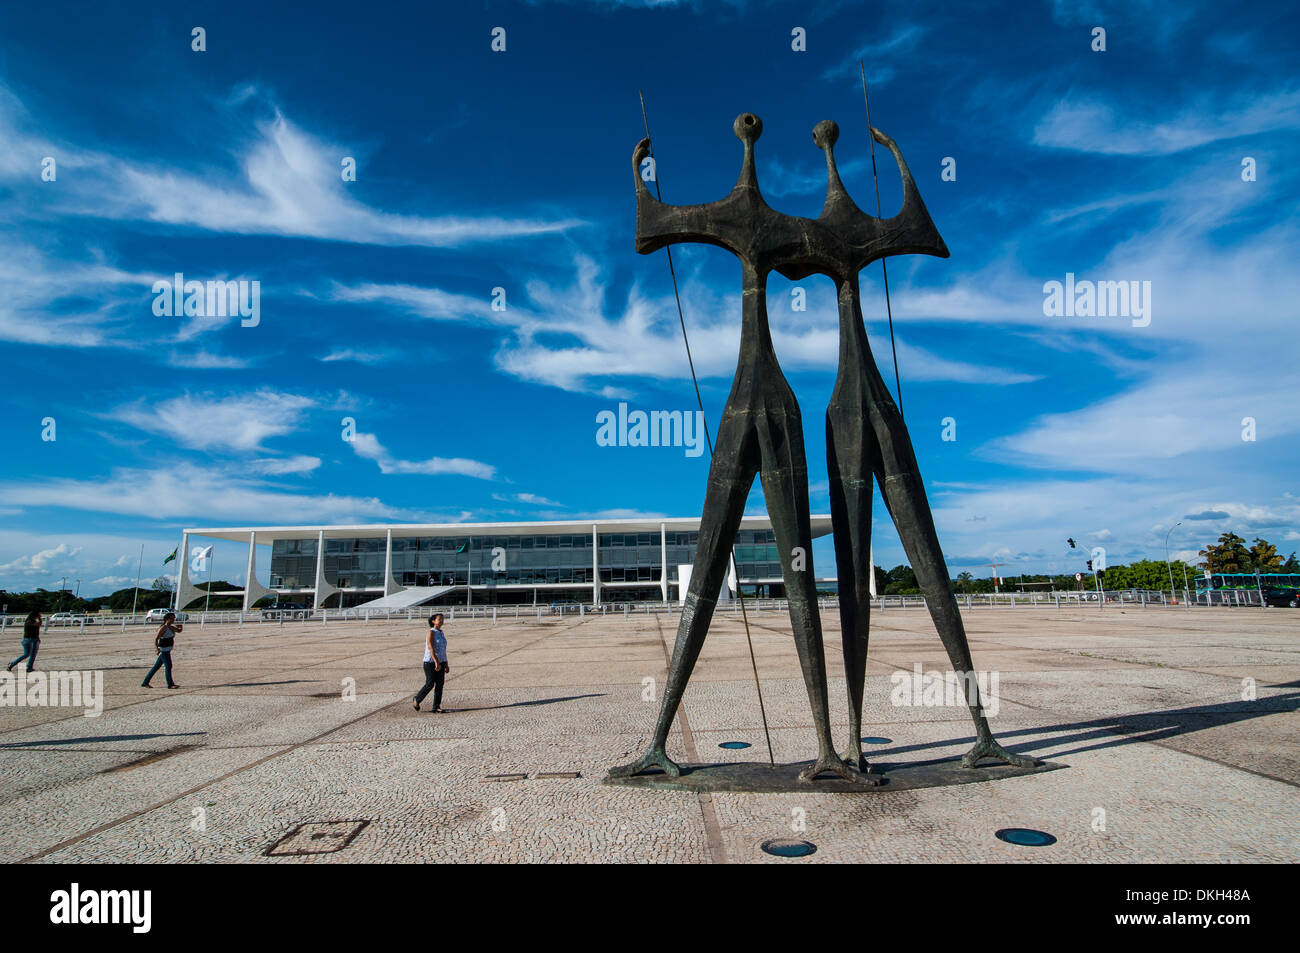 Dois Candangos (The Warriors), monument of builders of Brasilia, Brazil, South America Stock Photo